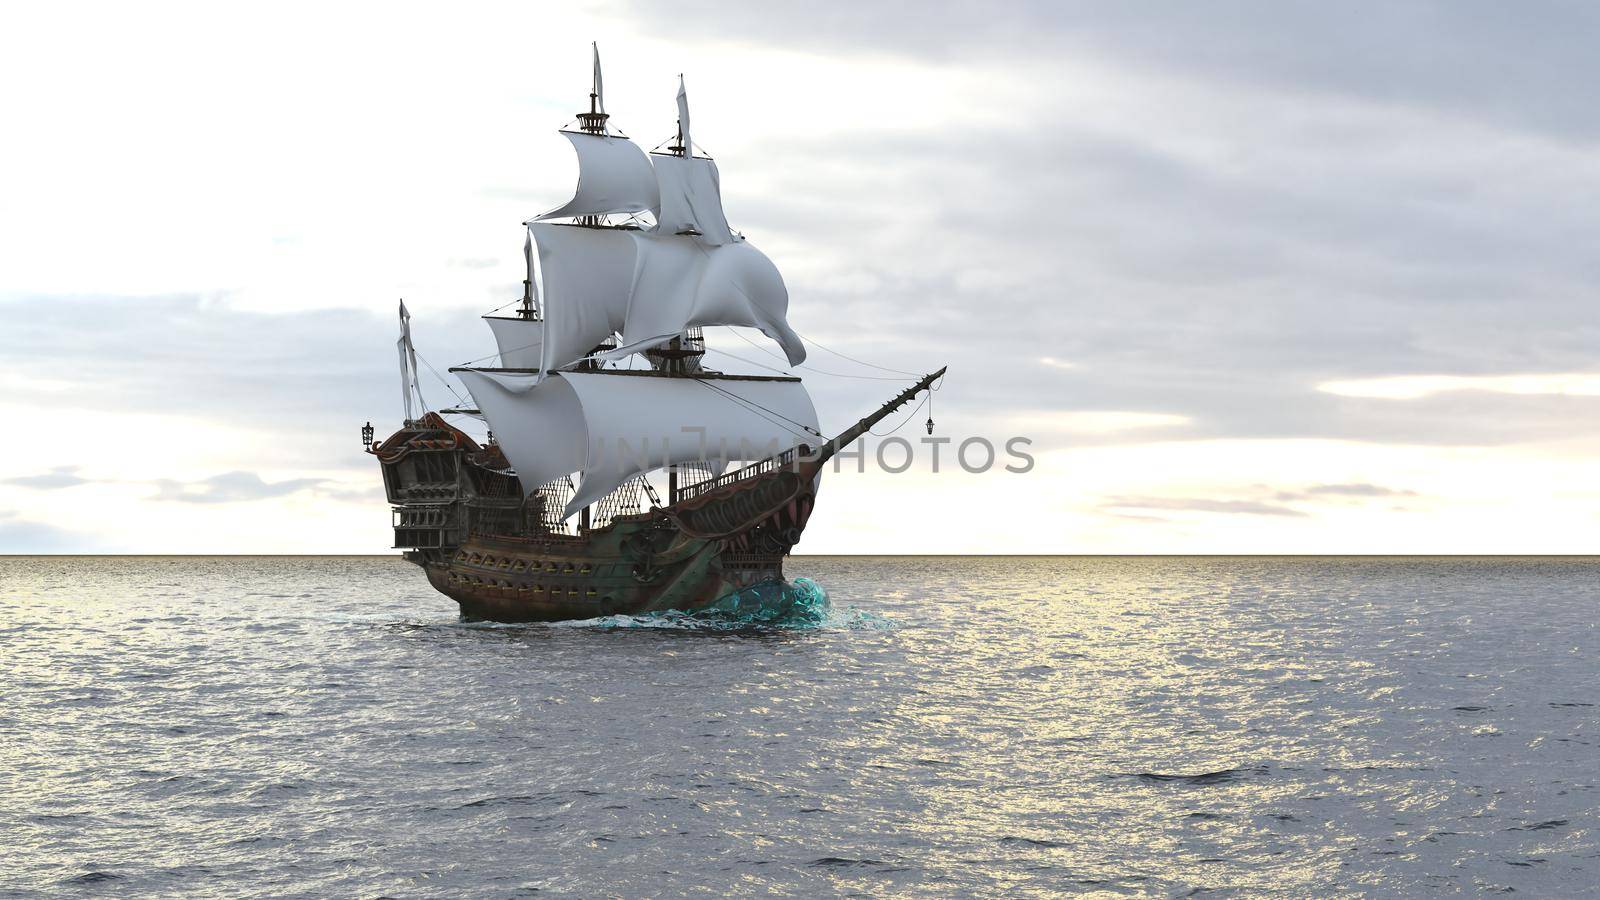 A medieval pirate ship sailing on a vast blue ocean. Concept of sea adventures in the middle ages.